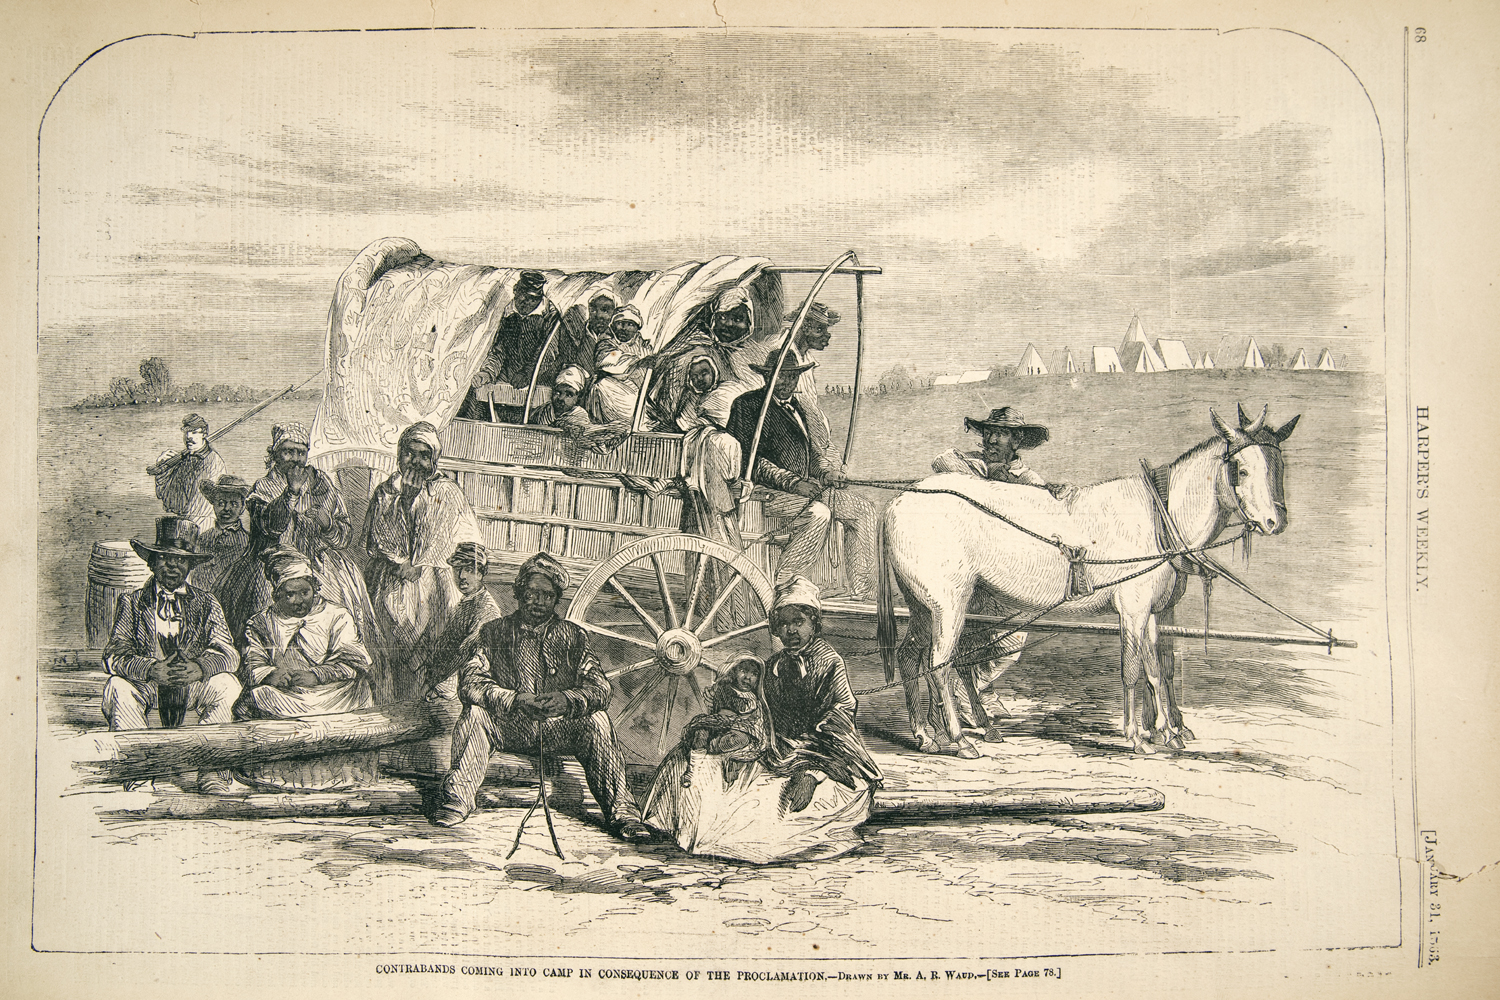 Alfred R. Waud, Contrabands Coming into Camp in Consequence of the Proclamation January 31, 1863, engraving from Harper's Weekly: A Journal of Civilization, vol. 9, no. 318, p. 68 (Newberry Library)